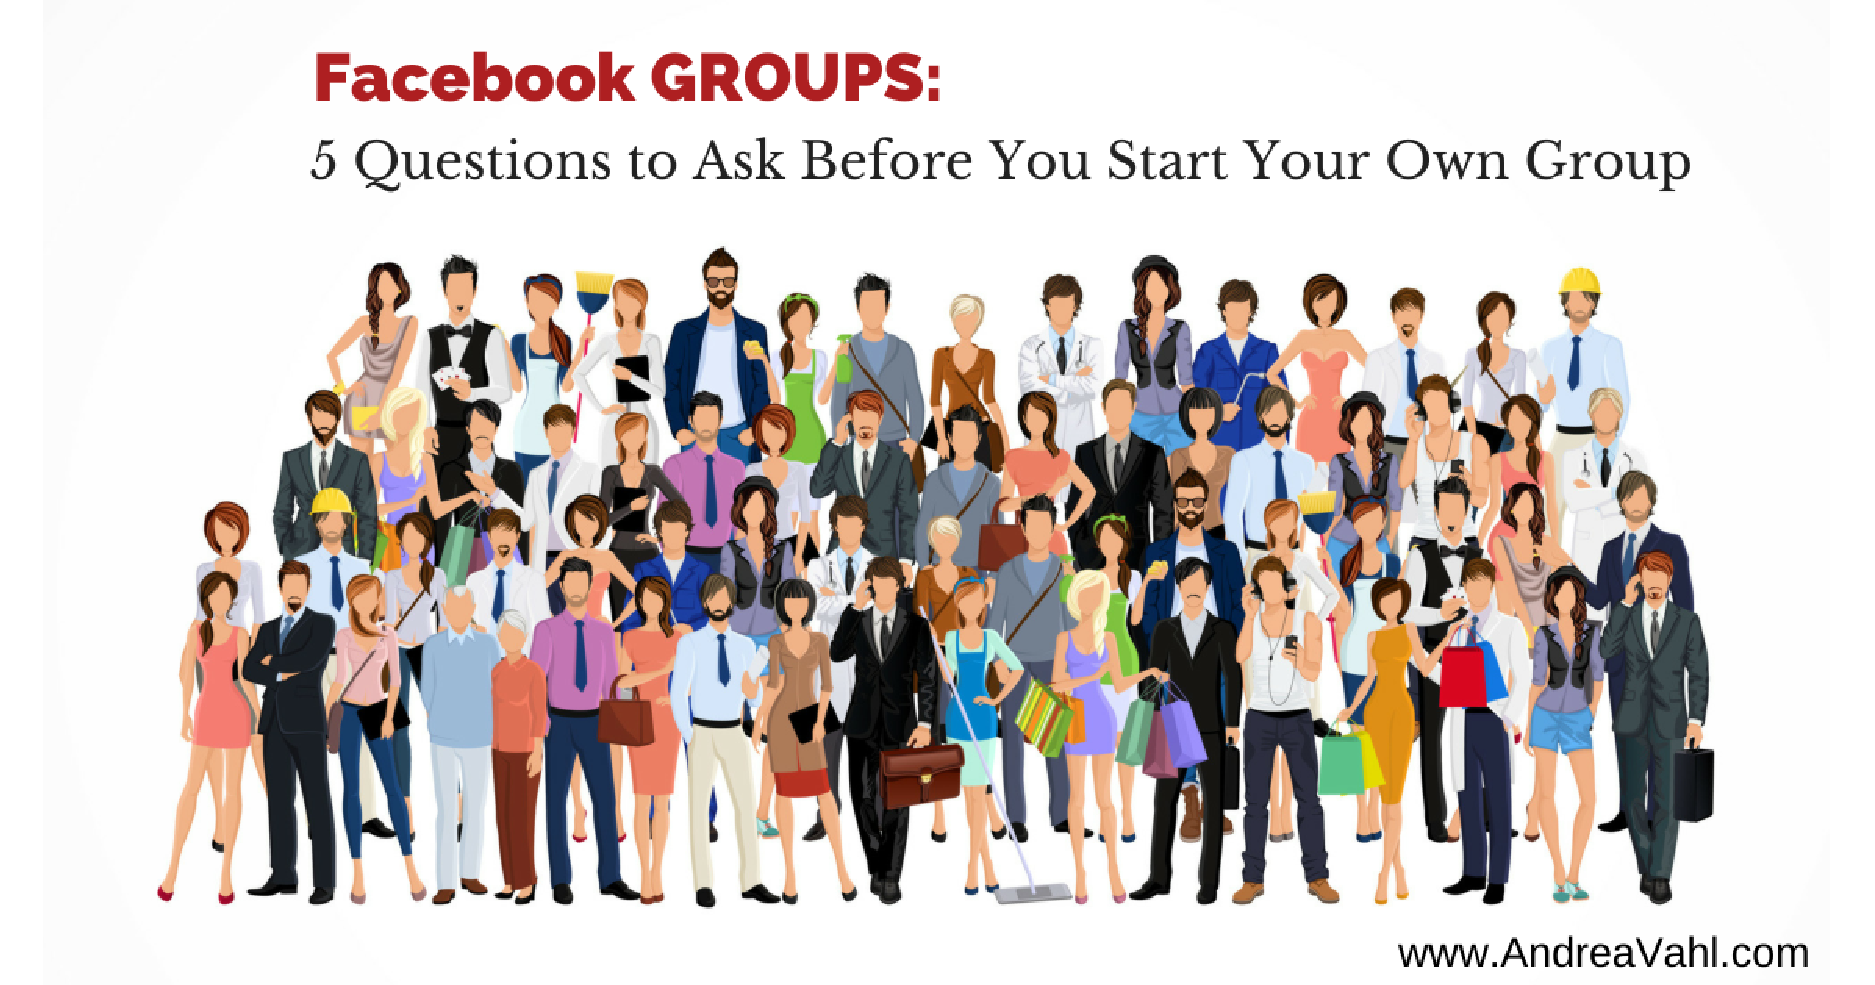 Facebook Groups - 5 Questions to Ask Before You Start Your Own Group